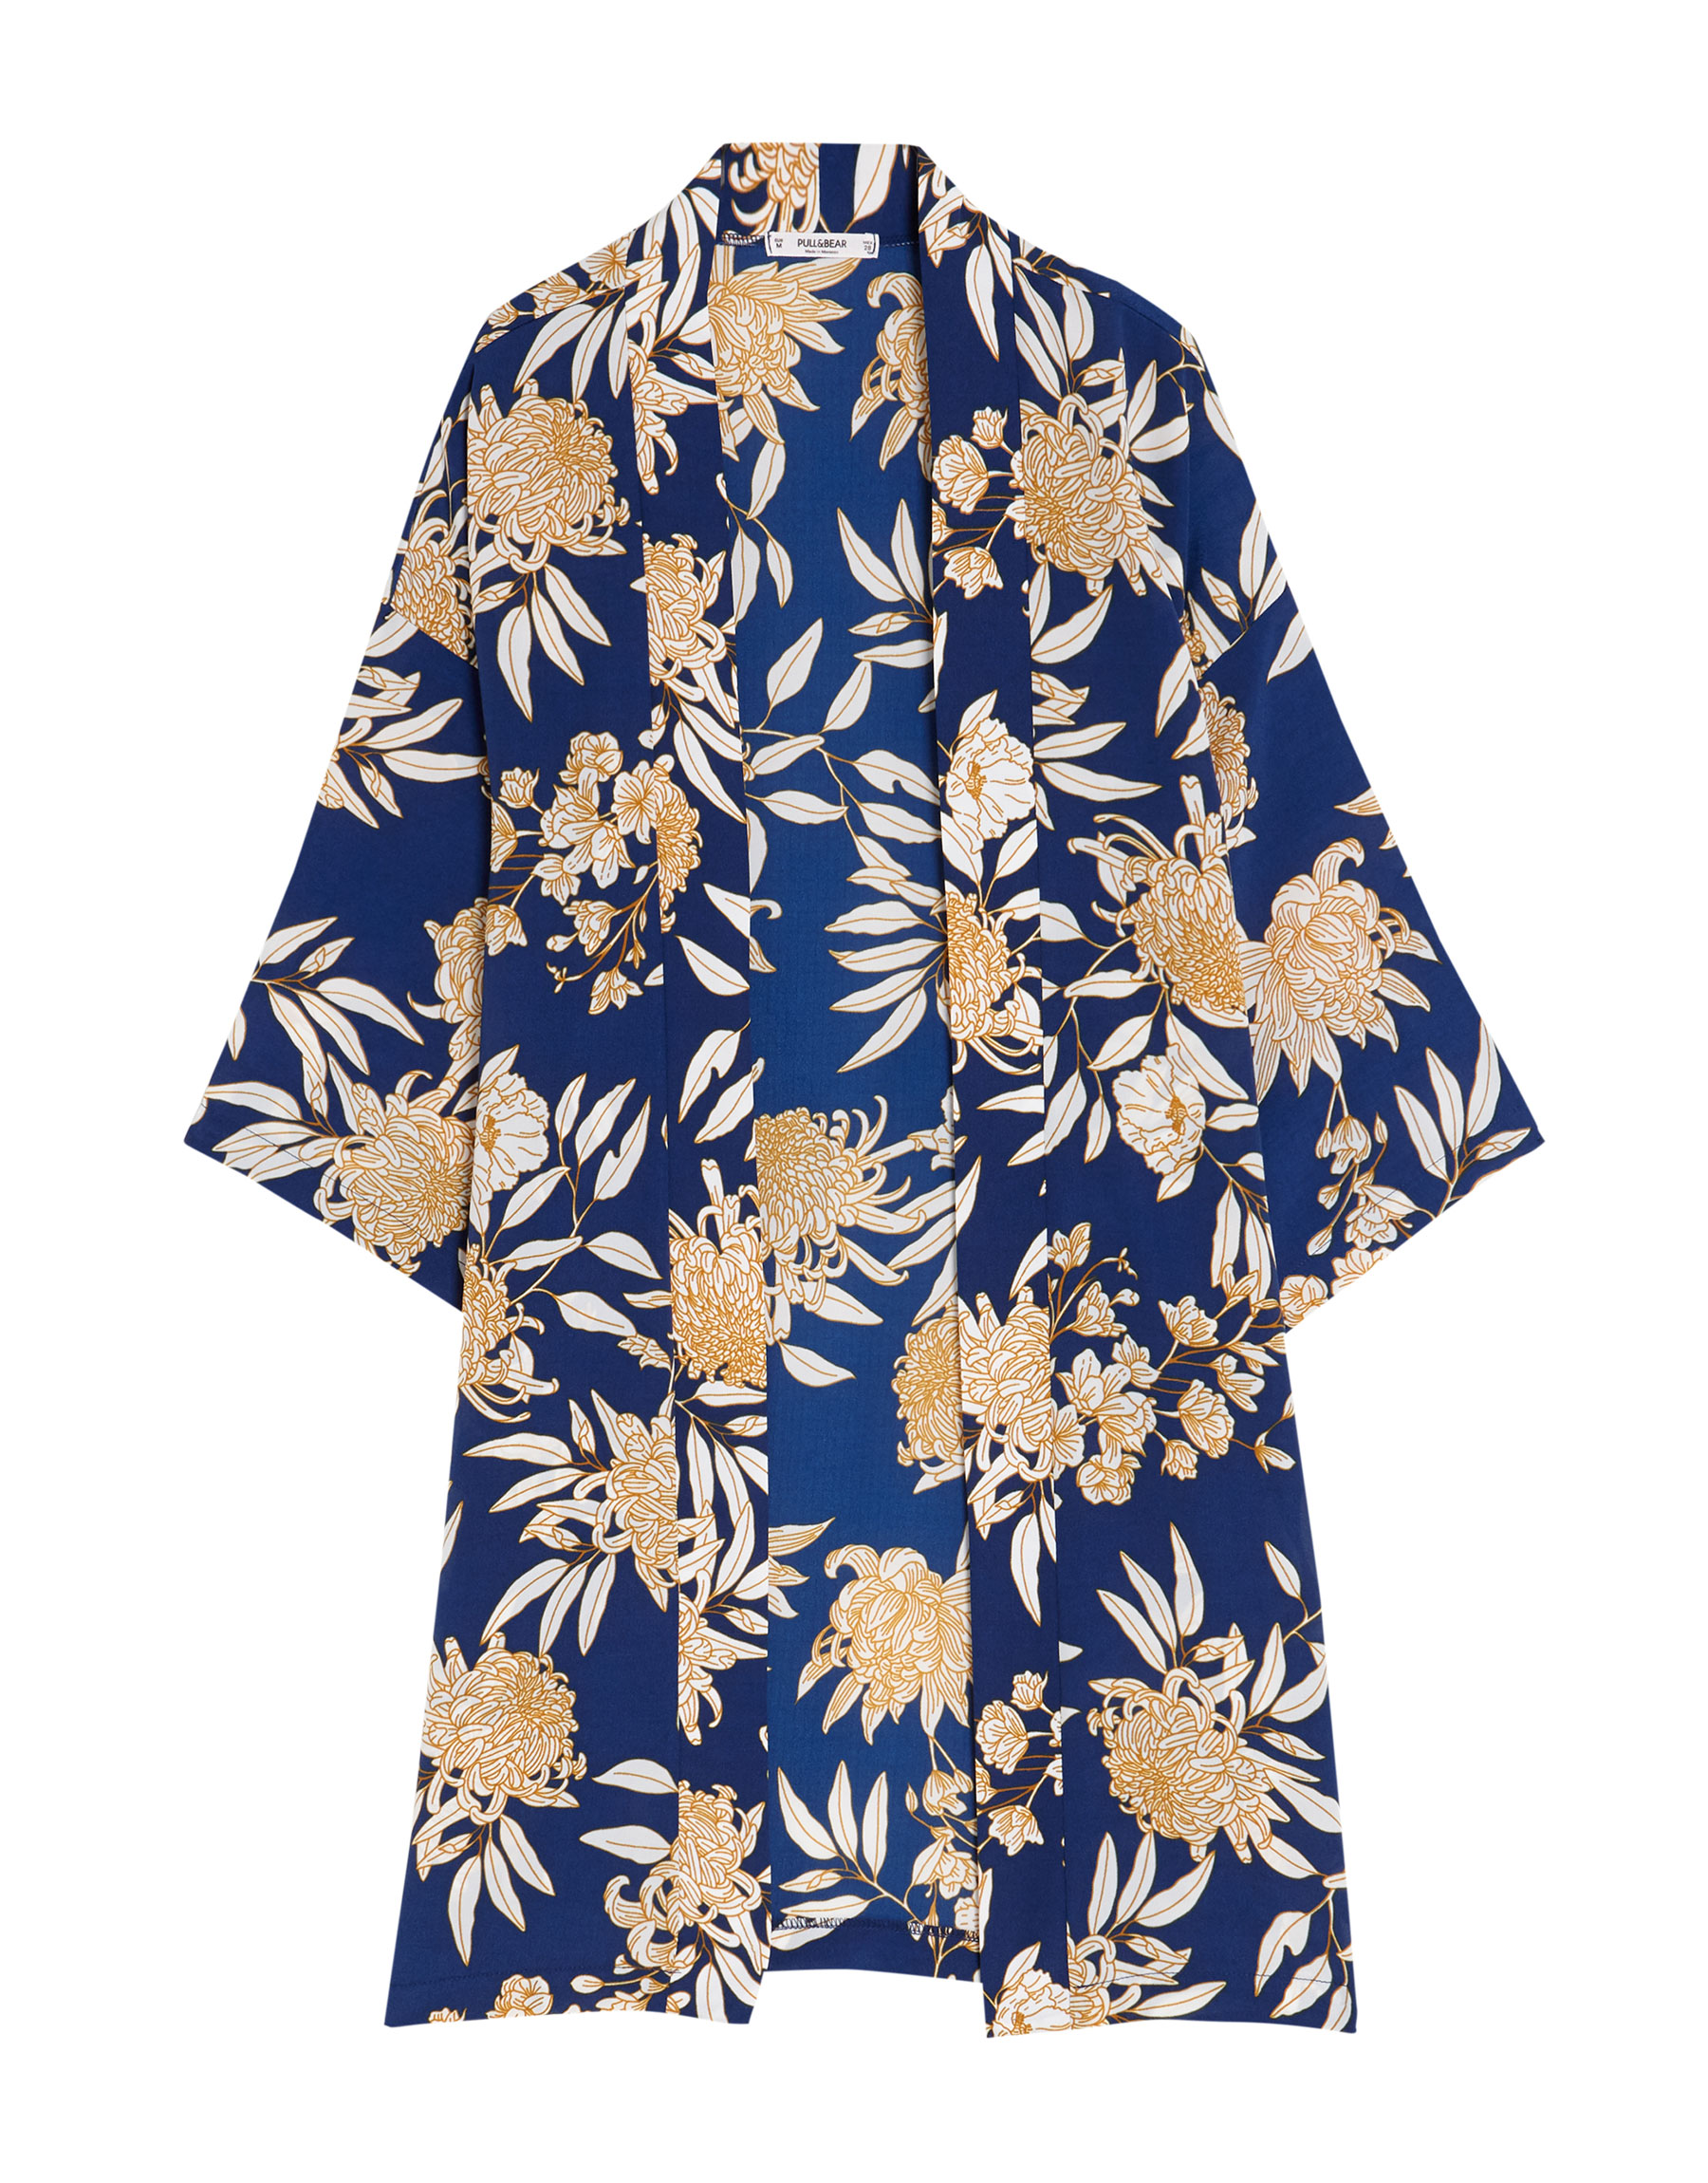 Pull & Bear Floral kimono at £19.99 | love the brands